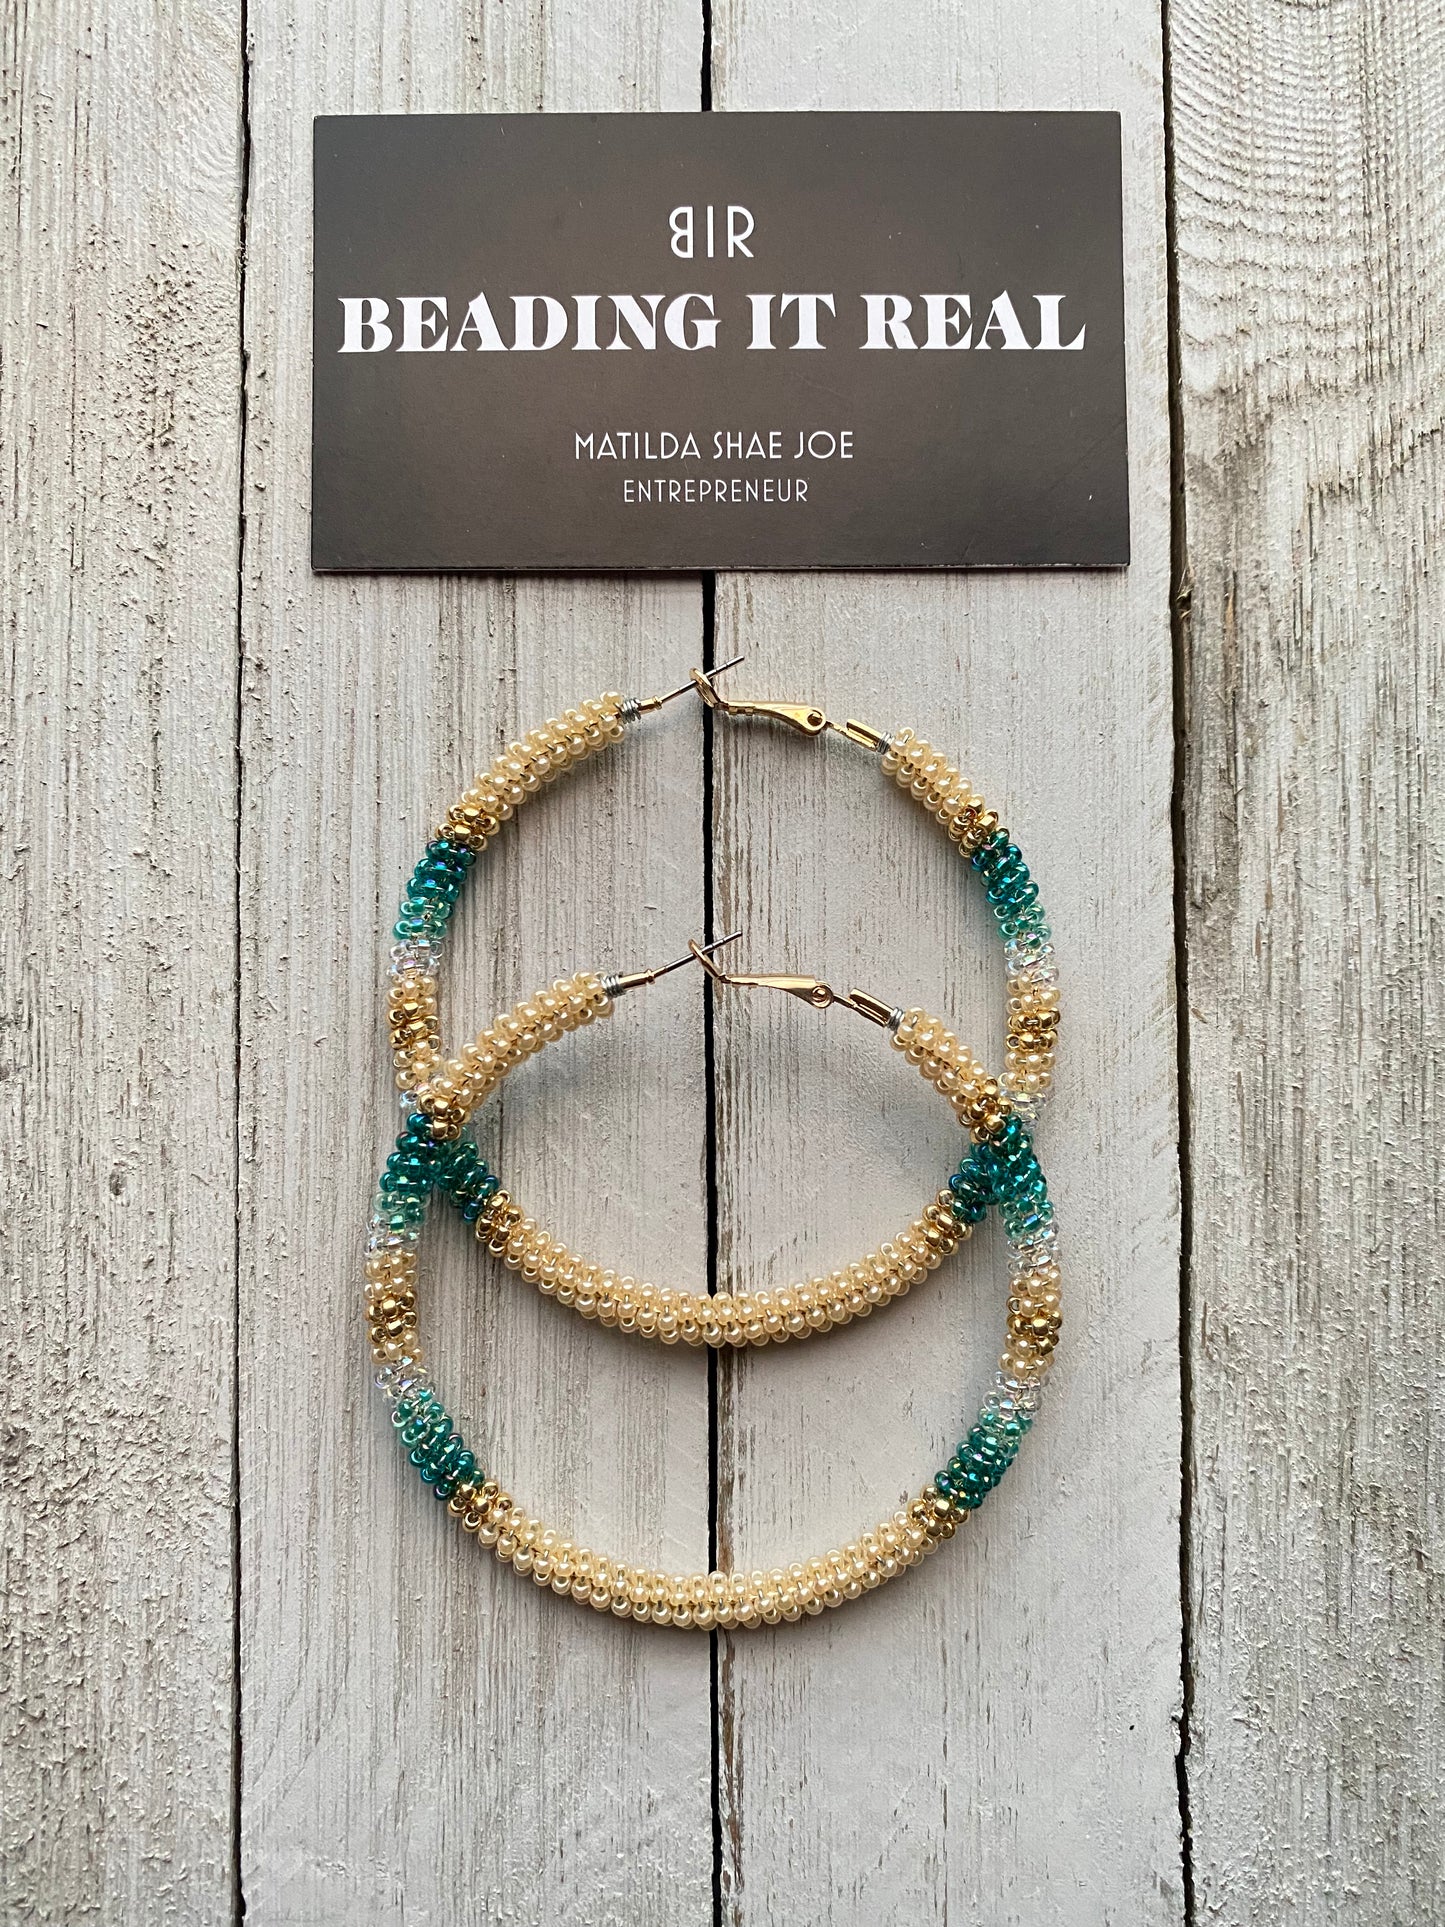 Classy Teal Ombré Hoops by Beading It Real